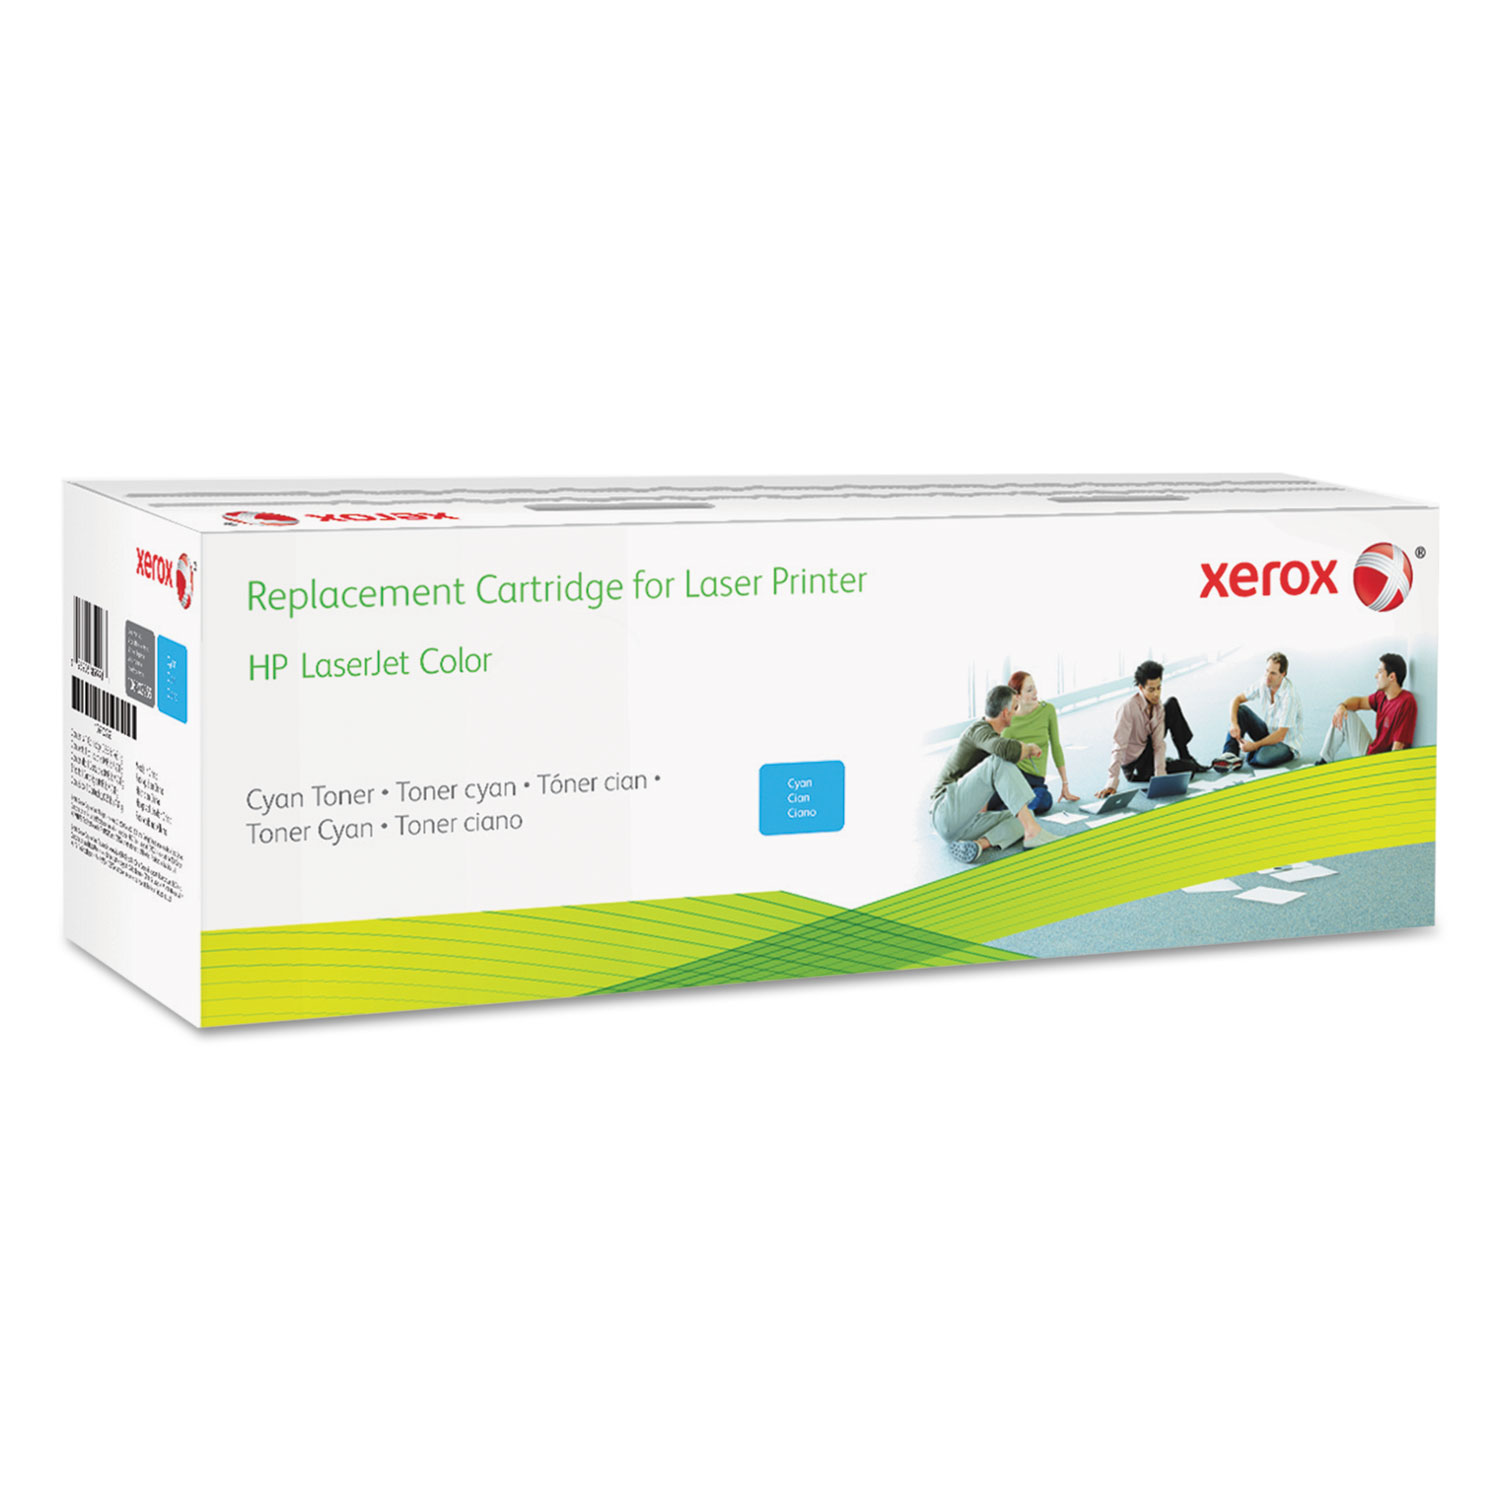  Xerox 006R03253 006R03253 Remanufactured CF381A (312A) Toner, 2800 Page-Yield, Cyan (XER006R03253) 